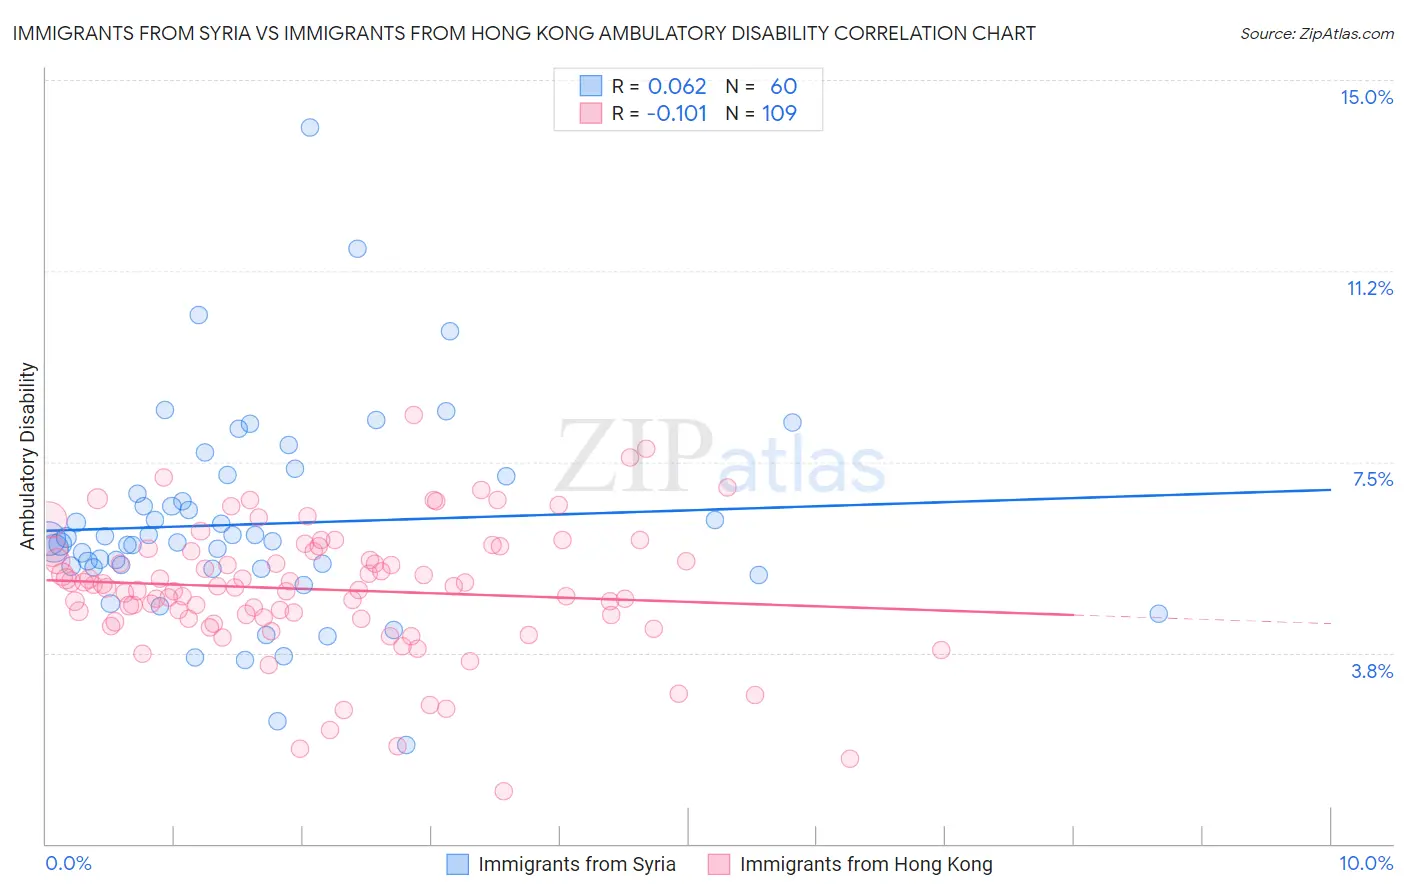 Immigrants from Syria vs Immigrants from Hong Kong Ambulatory Disability